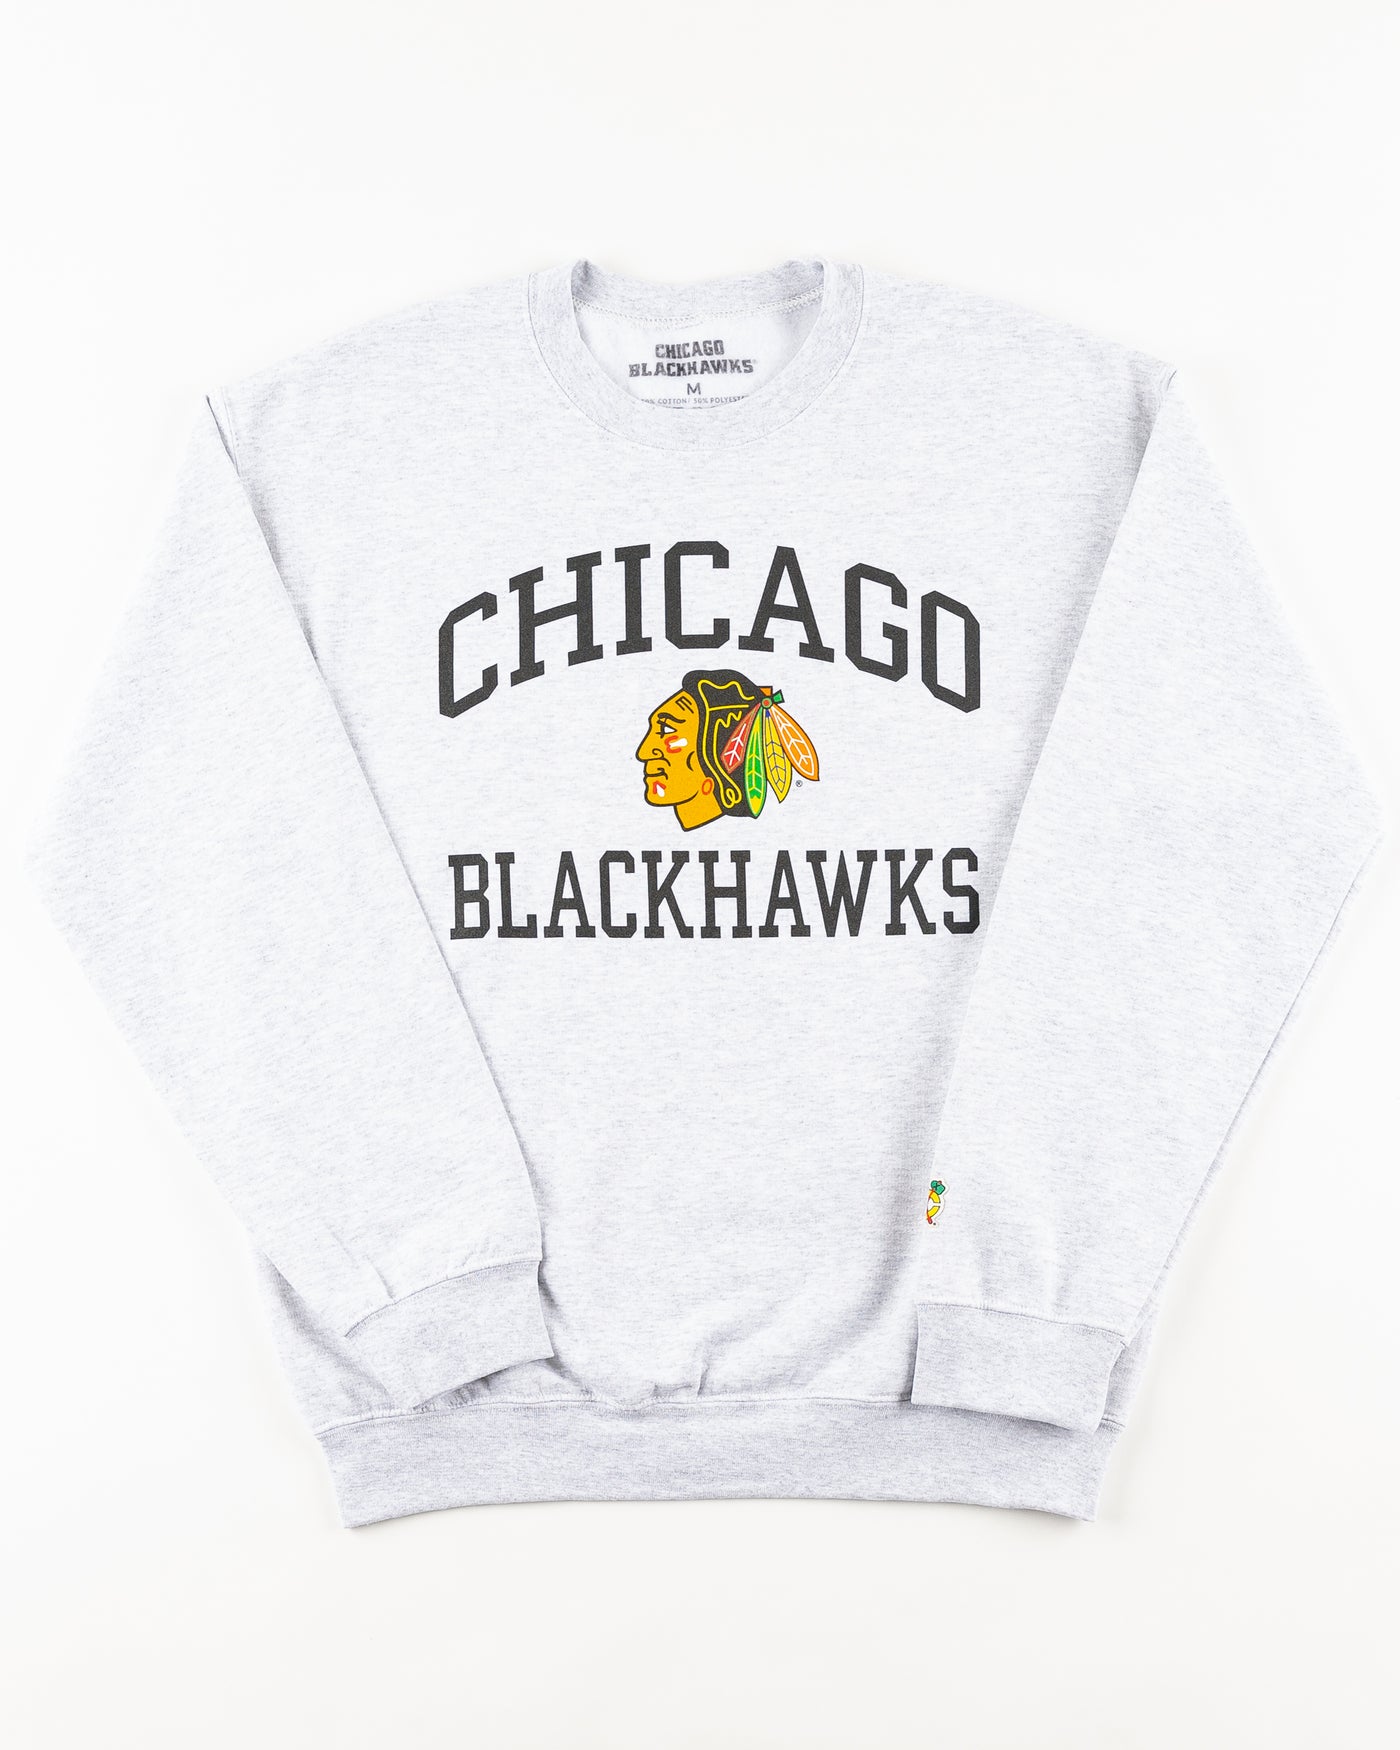 grey Chicago Blackhawks crewneck with wordmark and primary logo on chest and secondary logo on left wrist - front lay flat